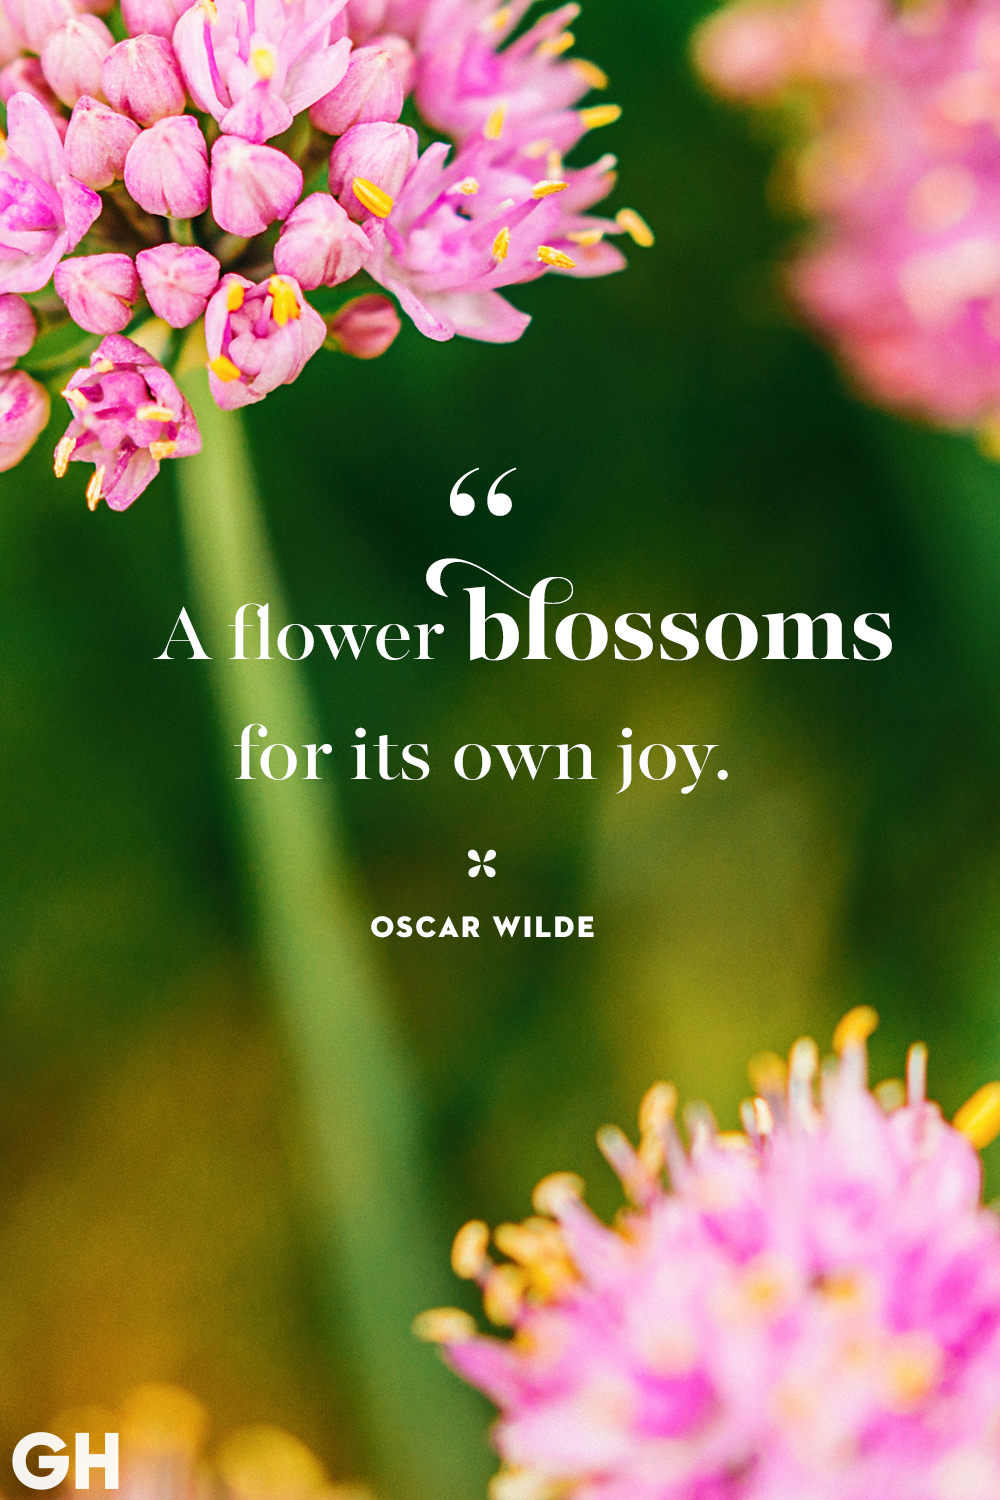 30 Inspirational Spring Quotes Quotes For Welcoming Spring